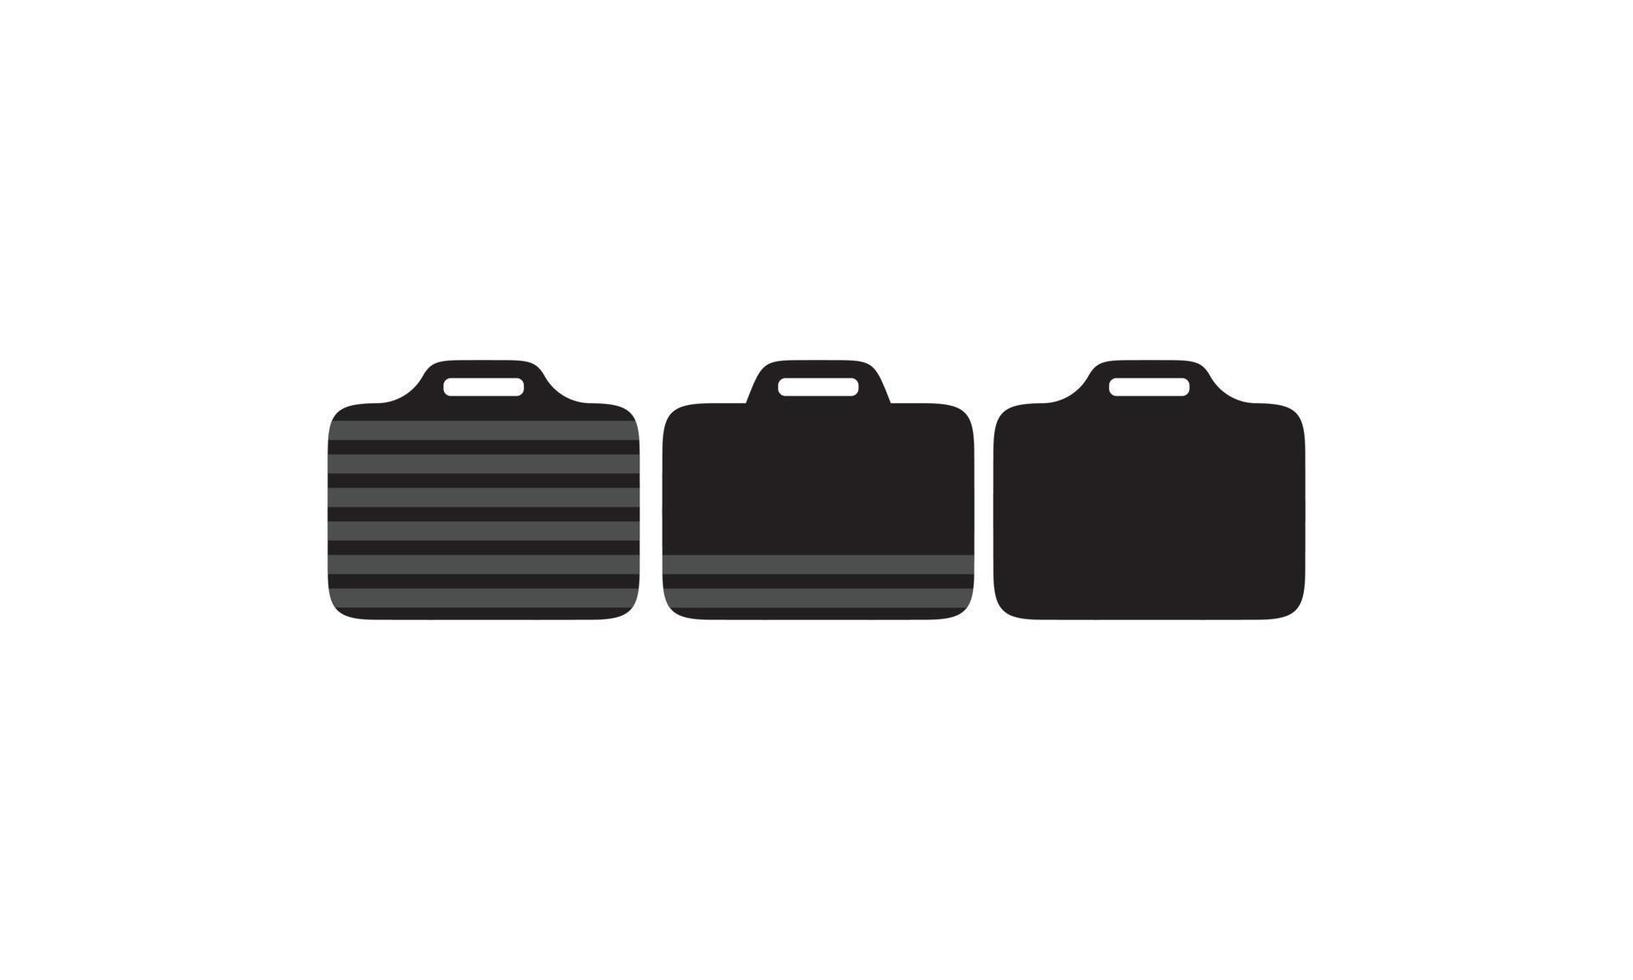 Business Briefcase, suitcase icon in solid black flat shape glyph icon, isolated on white background vector